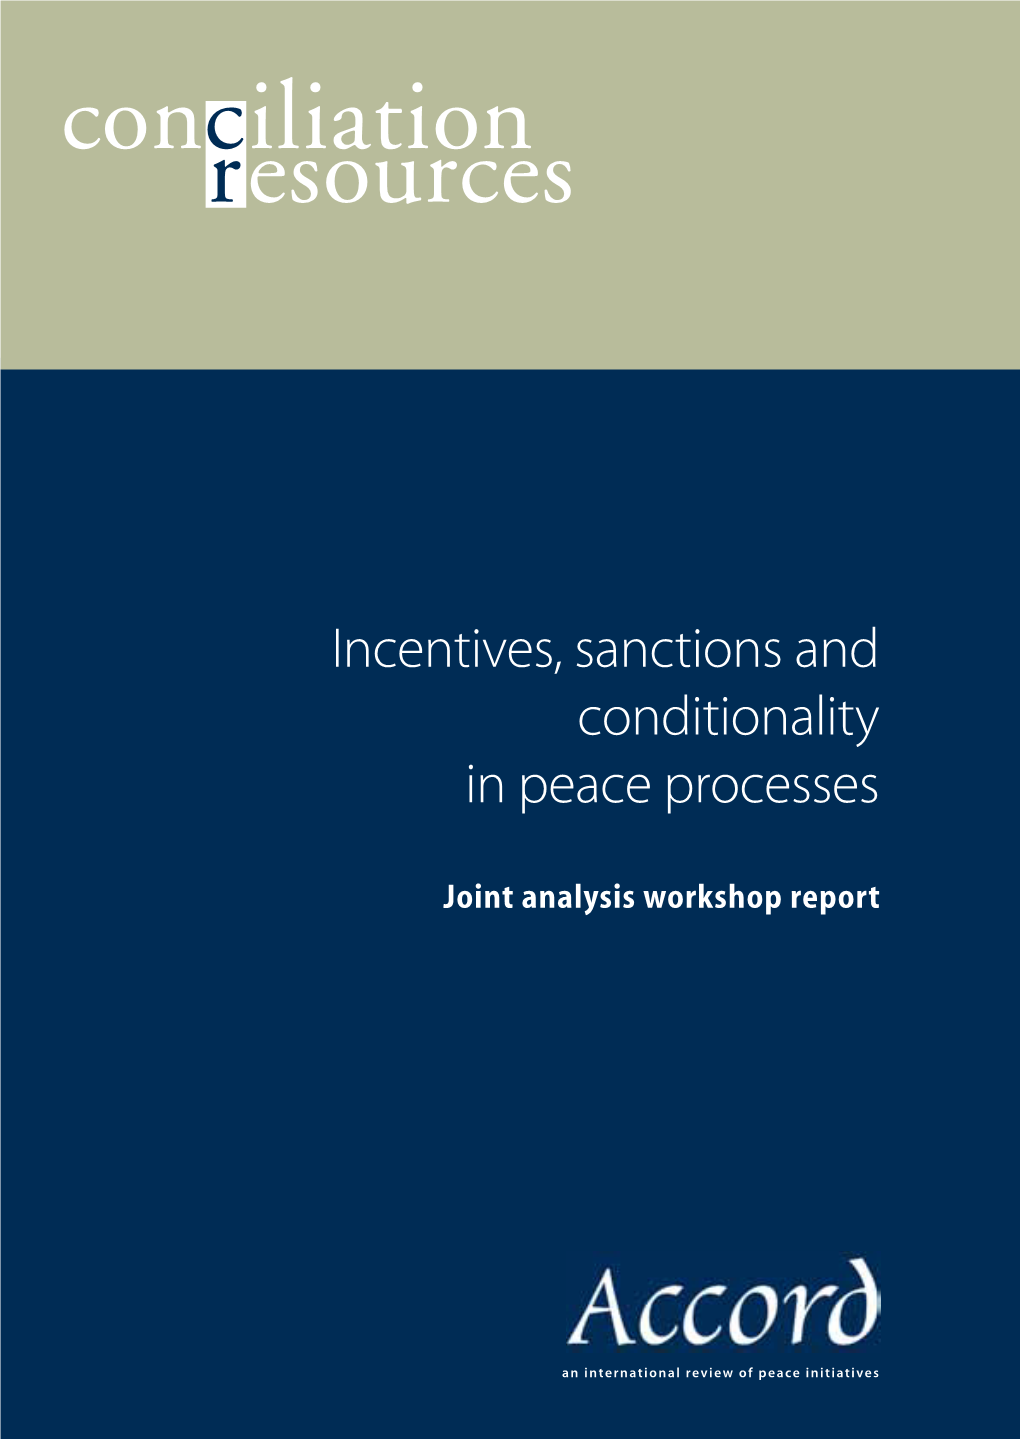 2. Conciliation Resources' Accord Project on Incentives, Sanctions